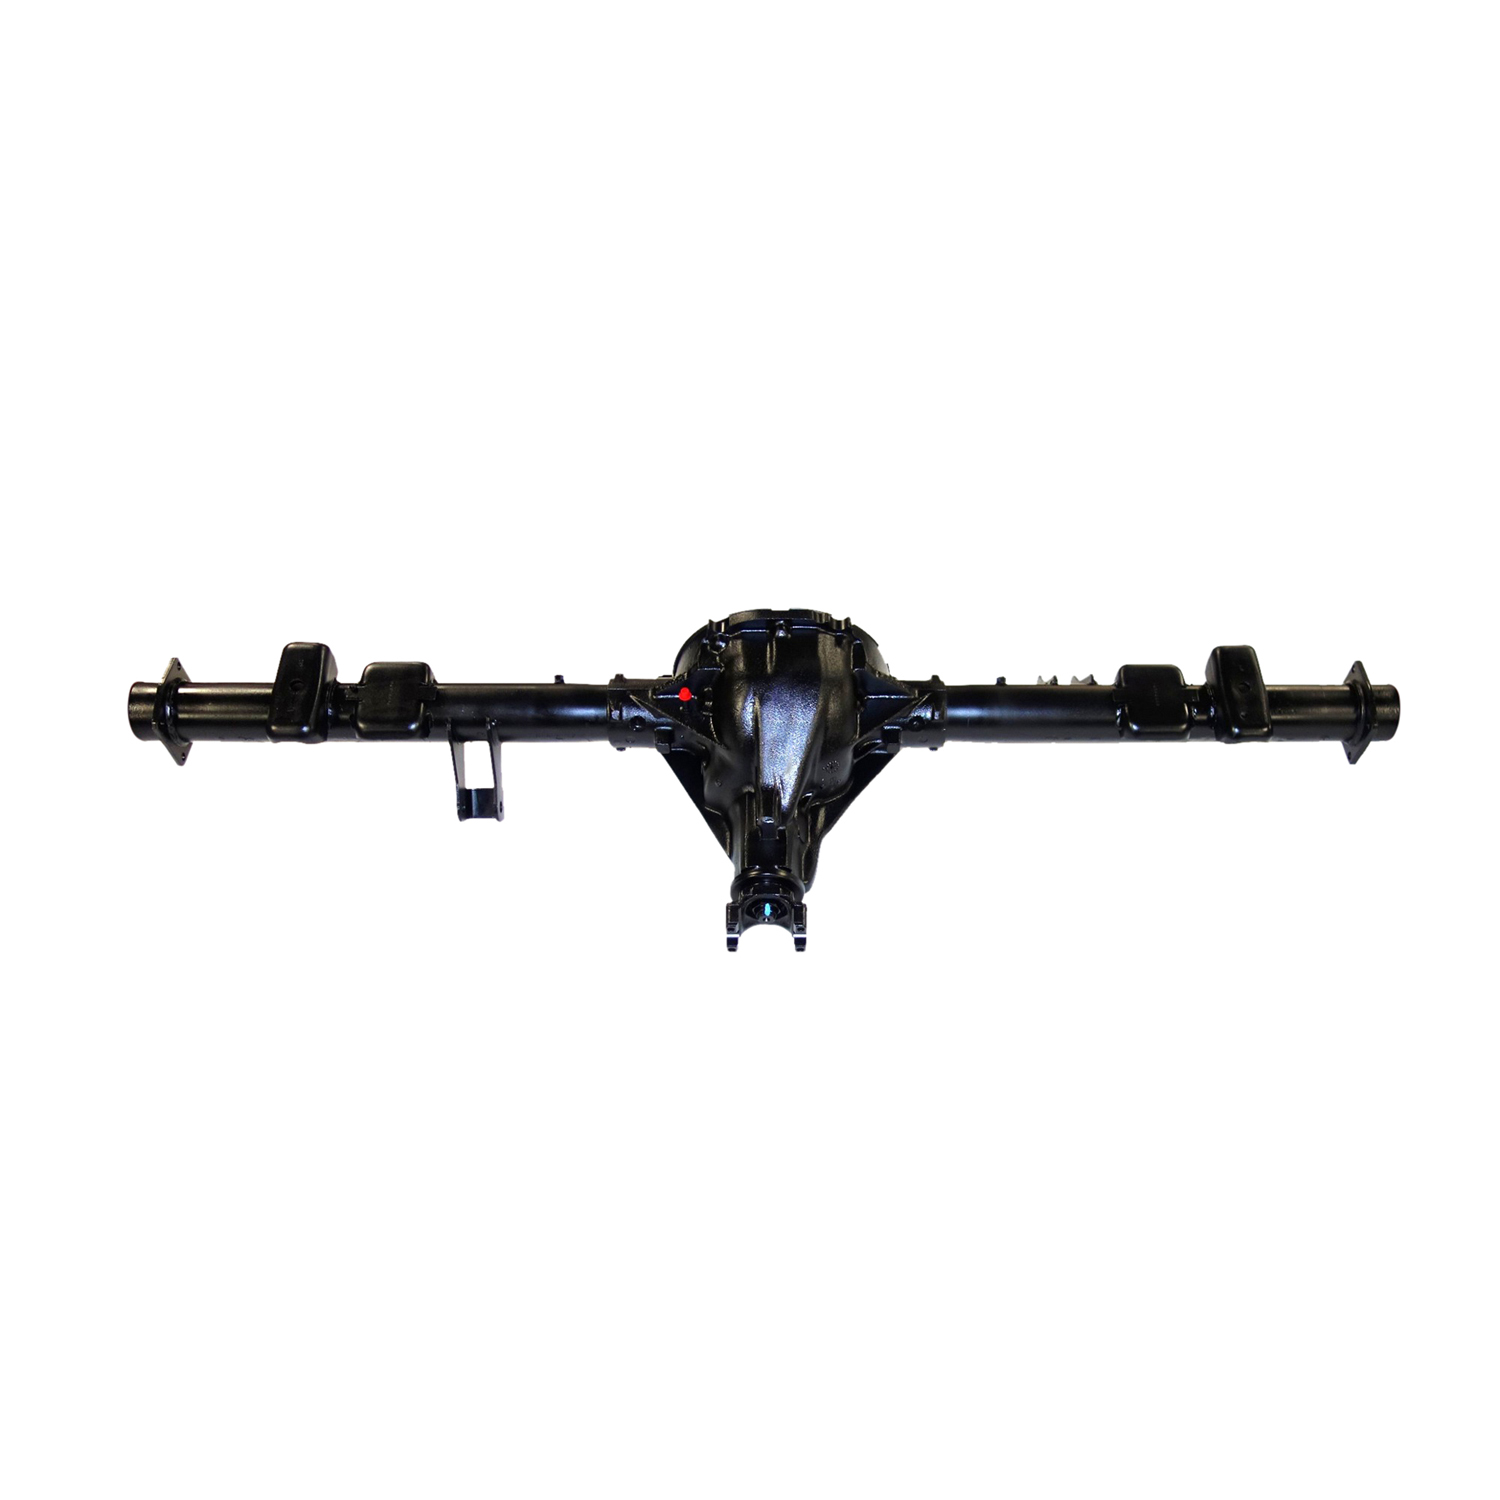 Reman Axle Assembly for GM 8.5" 88-99 GMC 1500 Pickup 3.73 Ratio, 2wd